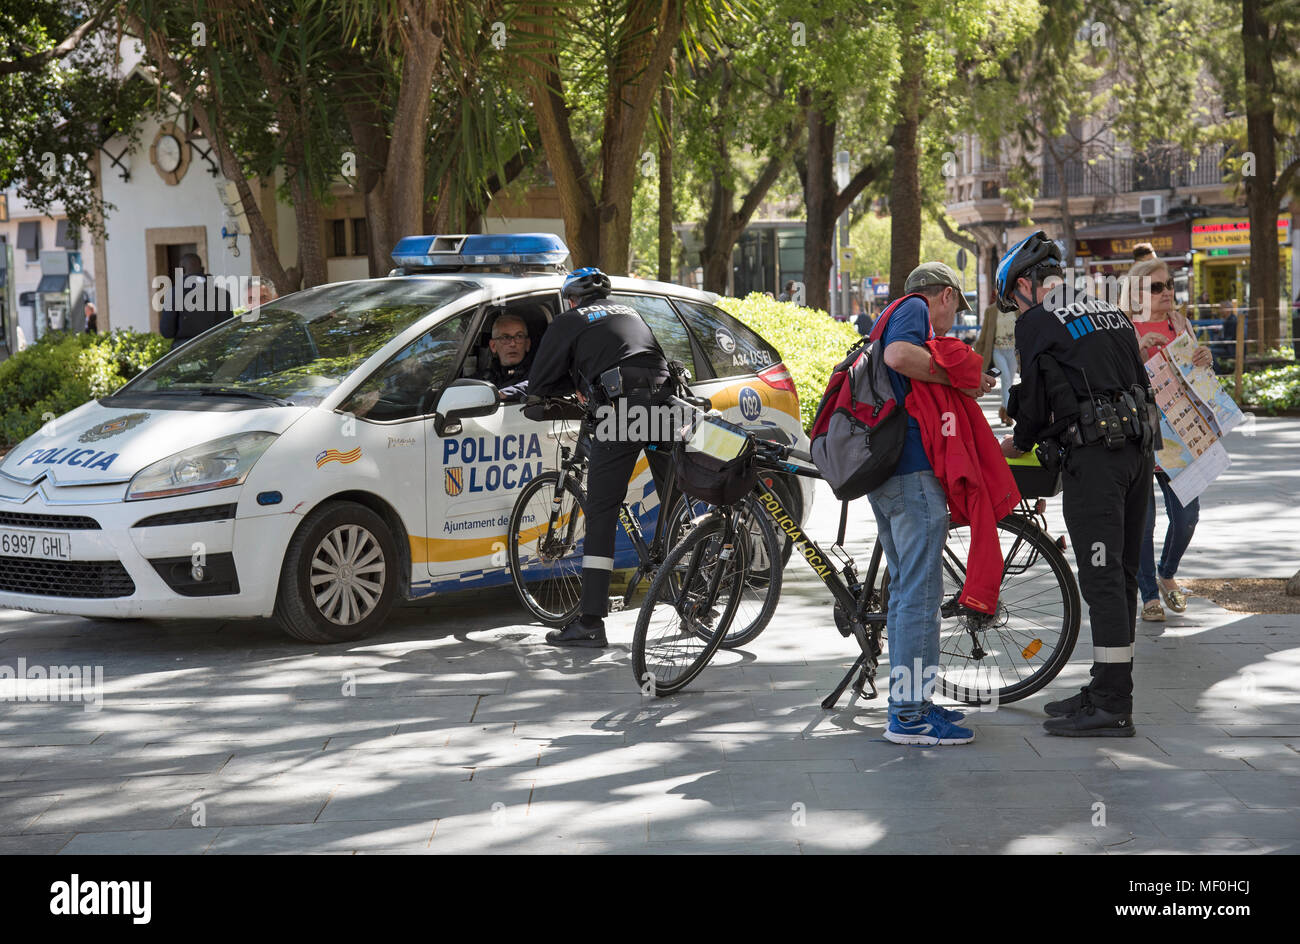 Palma, Majorca, Spain. 2018. Local police officers assist tourist in the centre of the city Stock Photo